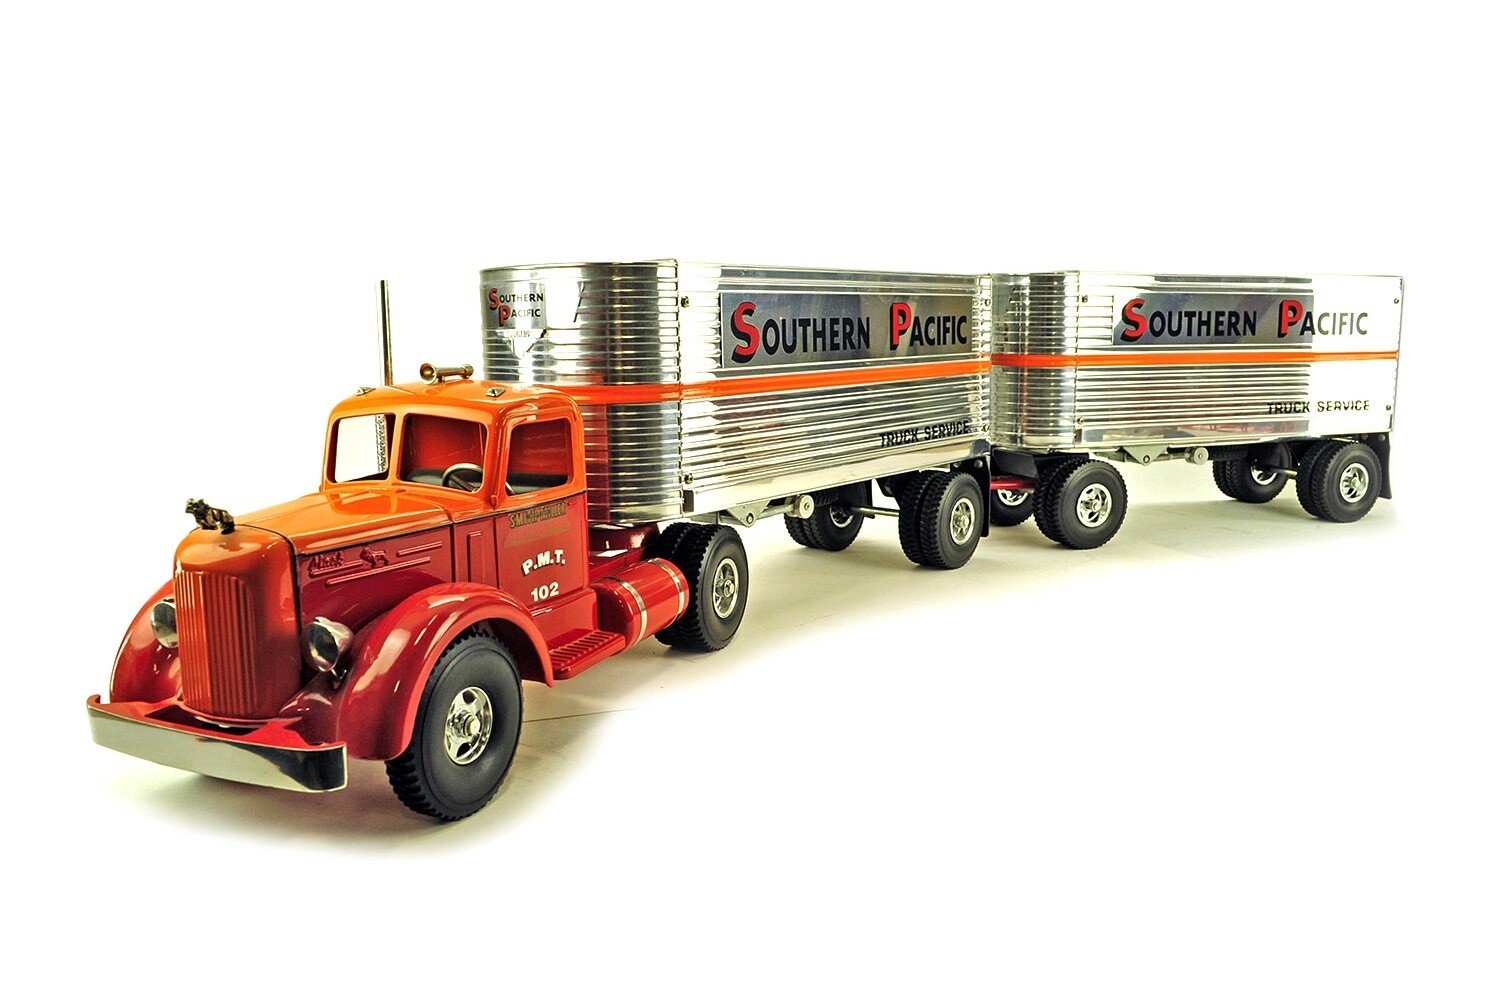 Mack L Model w/Two Van Trailers - Southern Pacific - 1:16